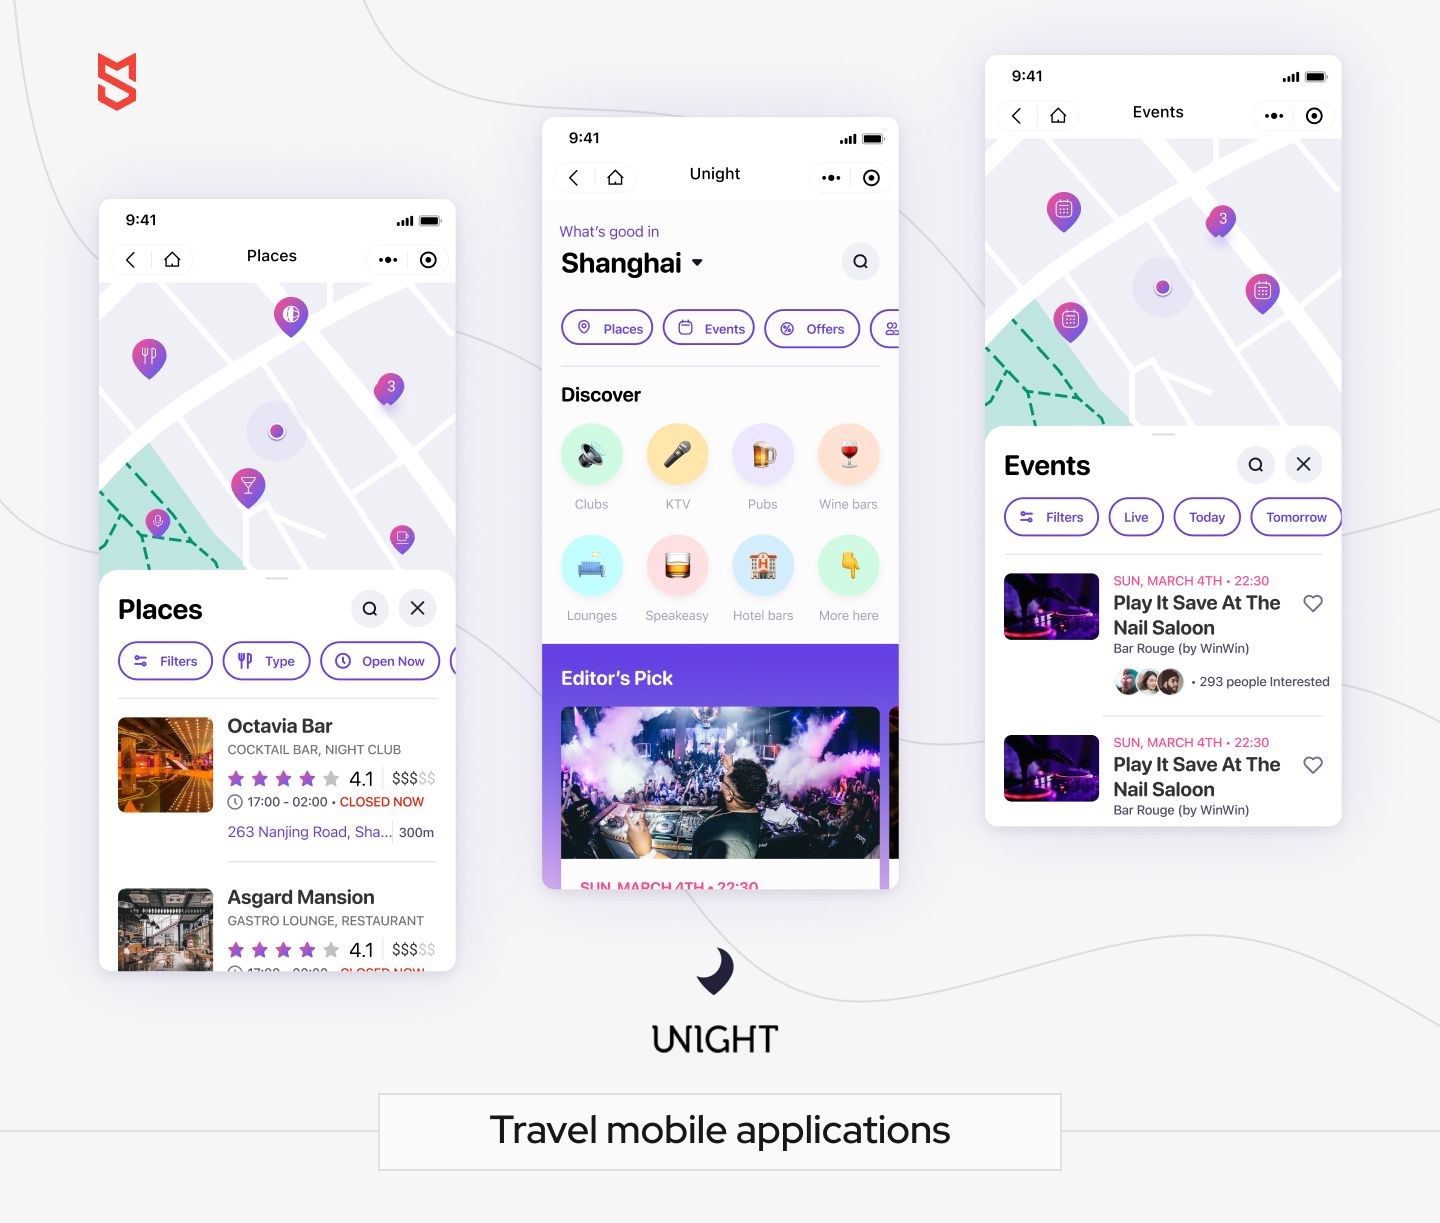 Travel mobile applications